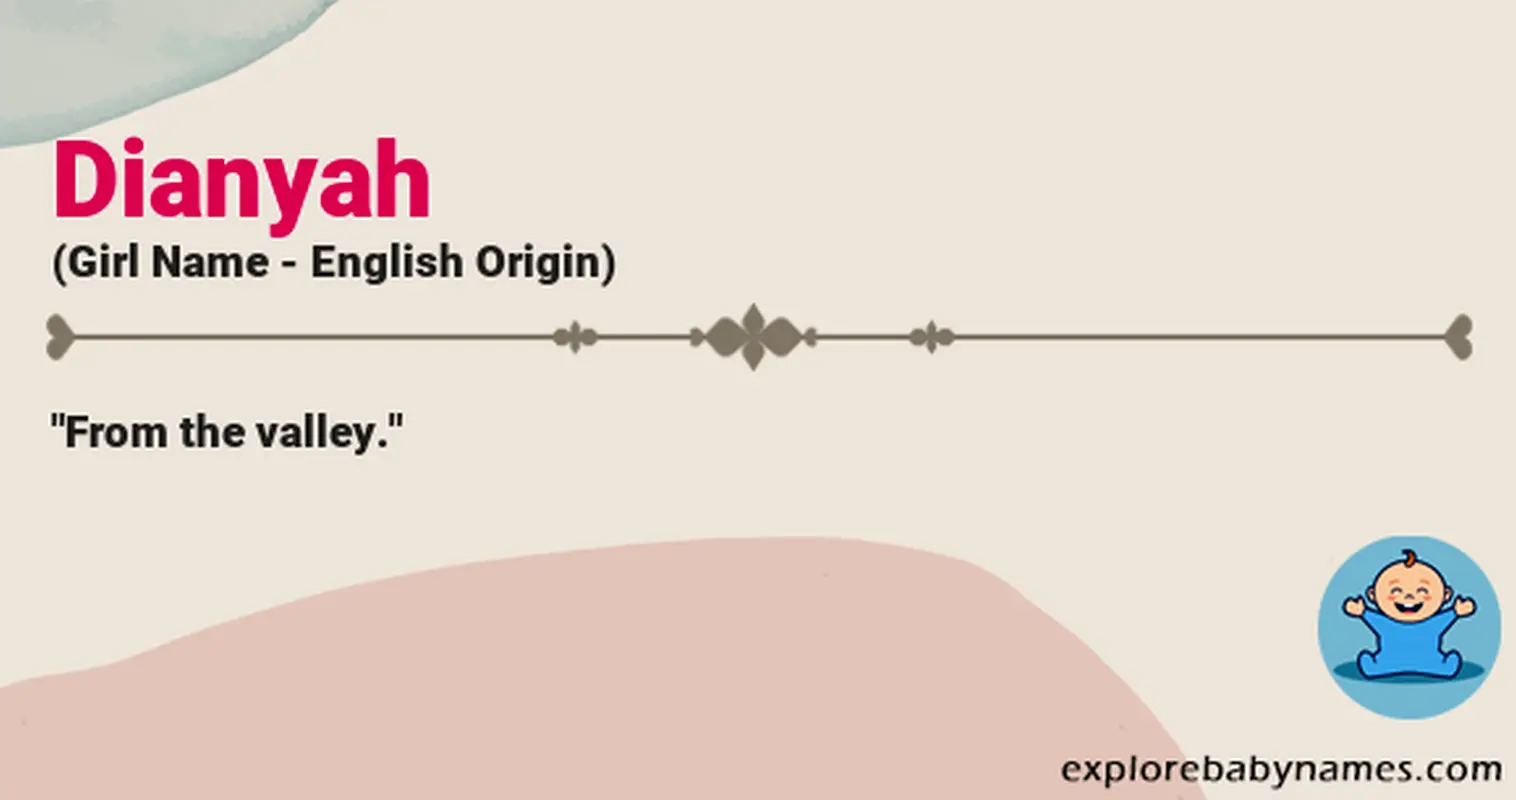 Meaning of Dianyah